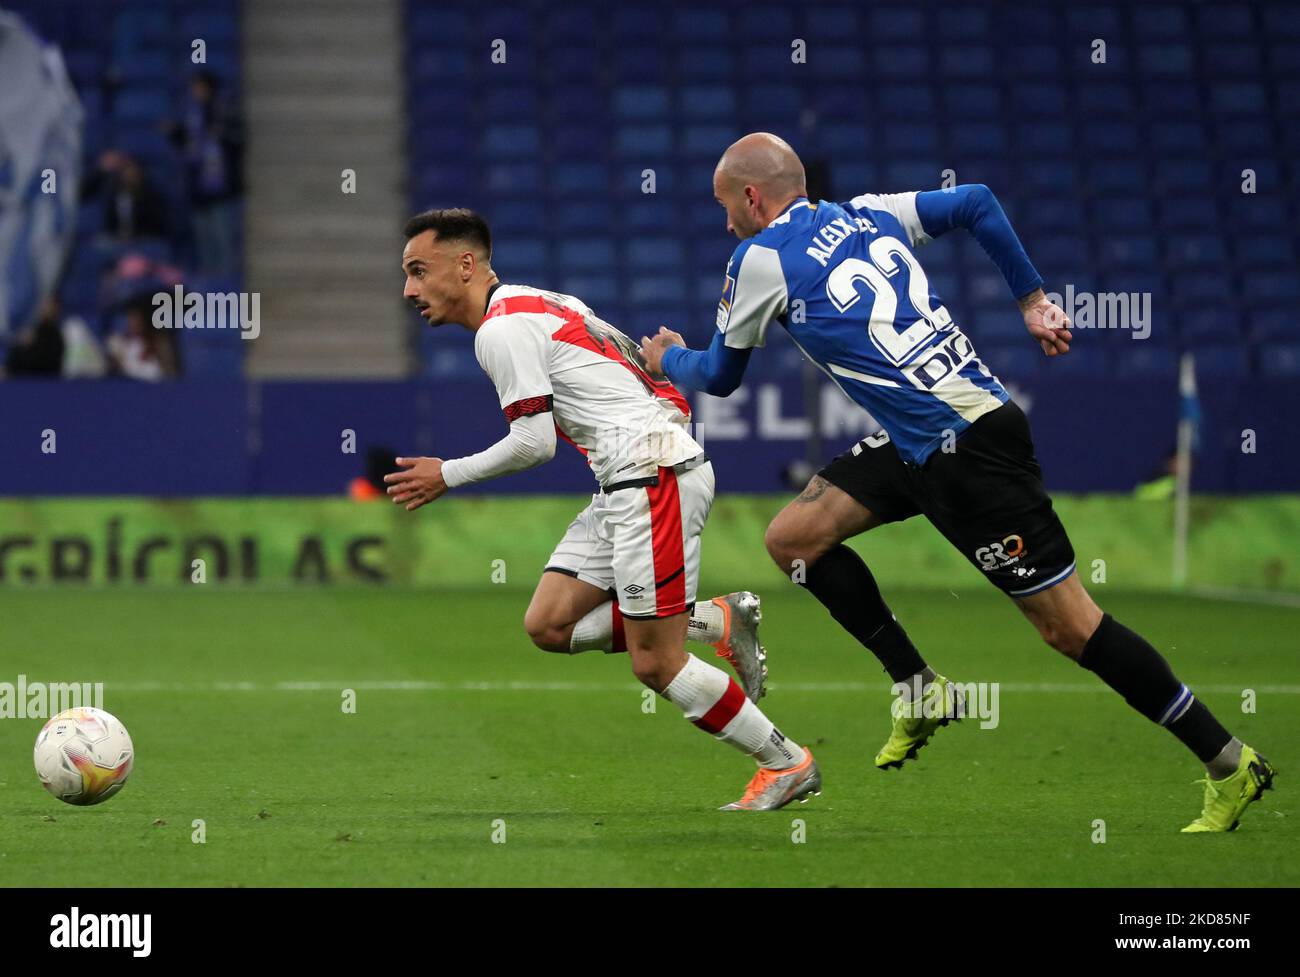 Alvaro Garcia and Aleix Vidal during the match between RCD Espanyol and Rayo Vallecano, corresponding to the week 33 of the Liga Santander, played at the RCDE Stadium, in Barcelona, on 21th April 2022. (Photo by Joan Valls/Urbanandsport /NurPhoto) Stock Photo